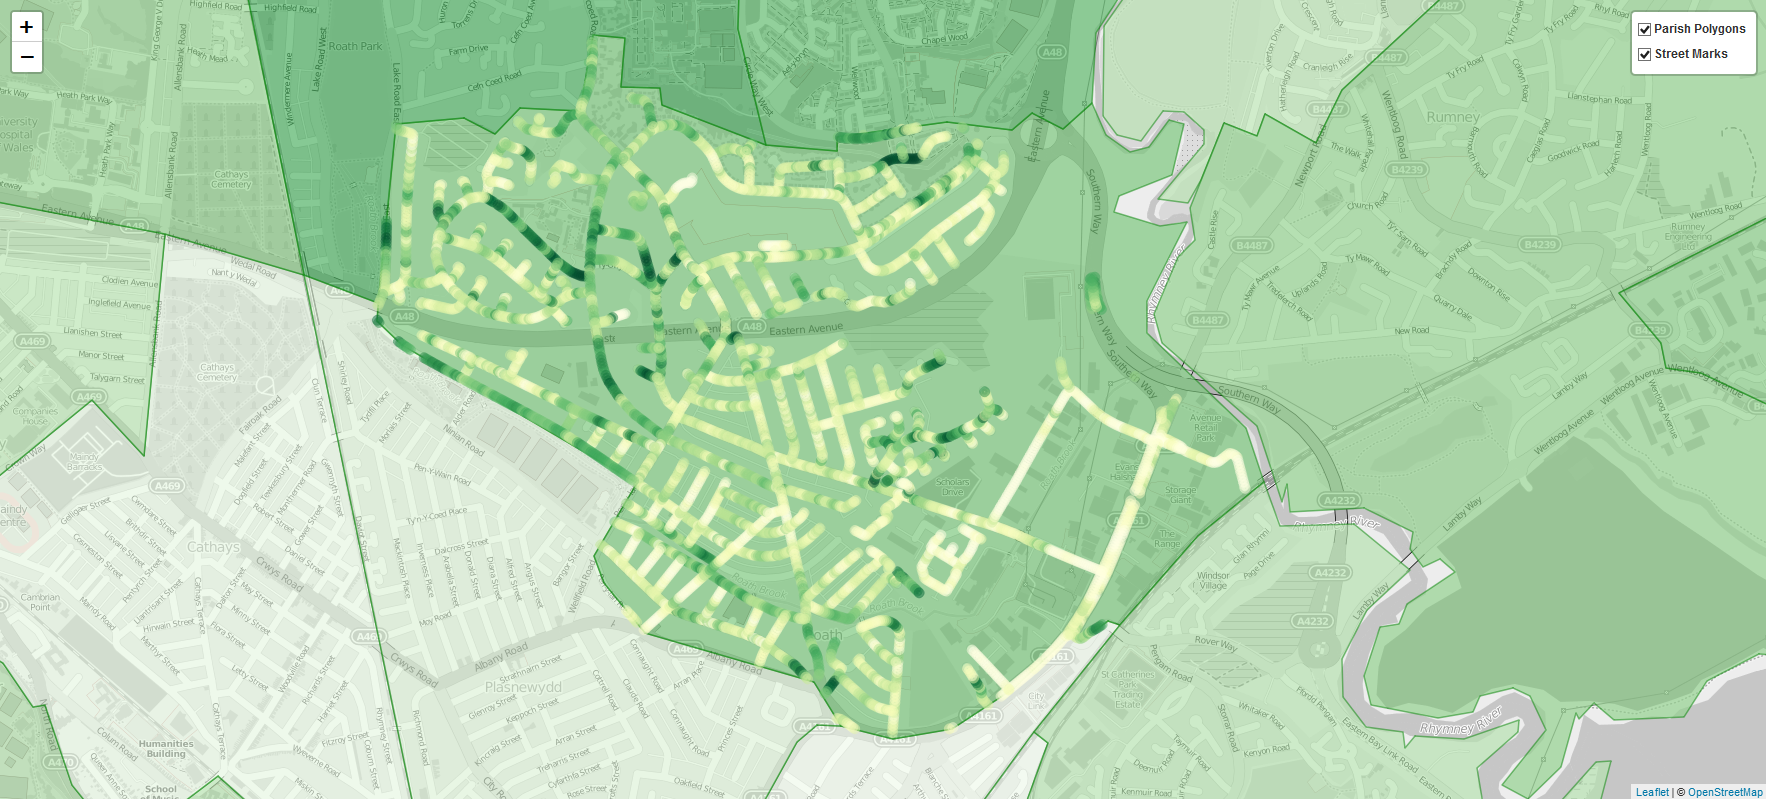 Visualising the urban forest with R, shiny and leafletjs